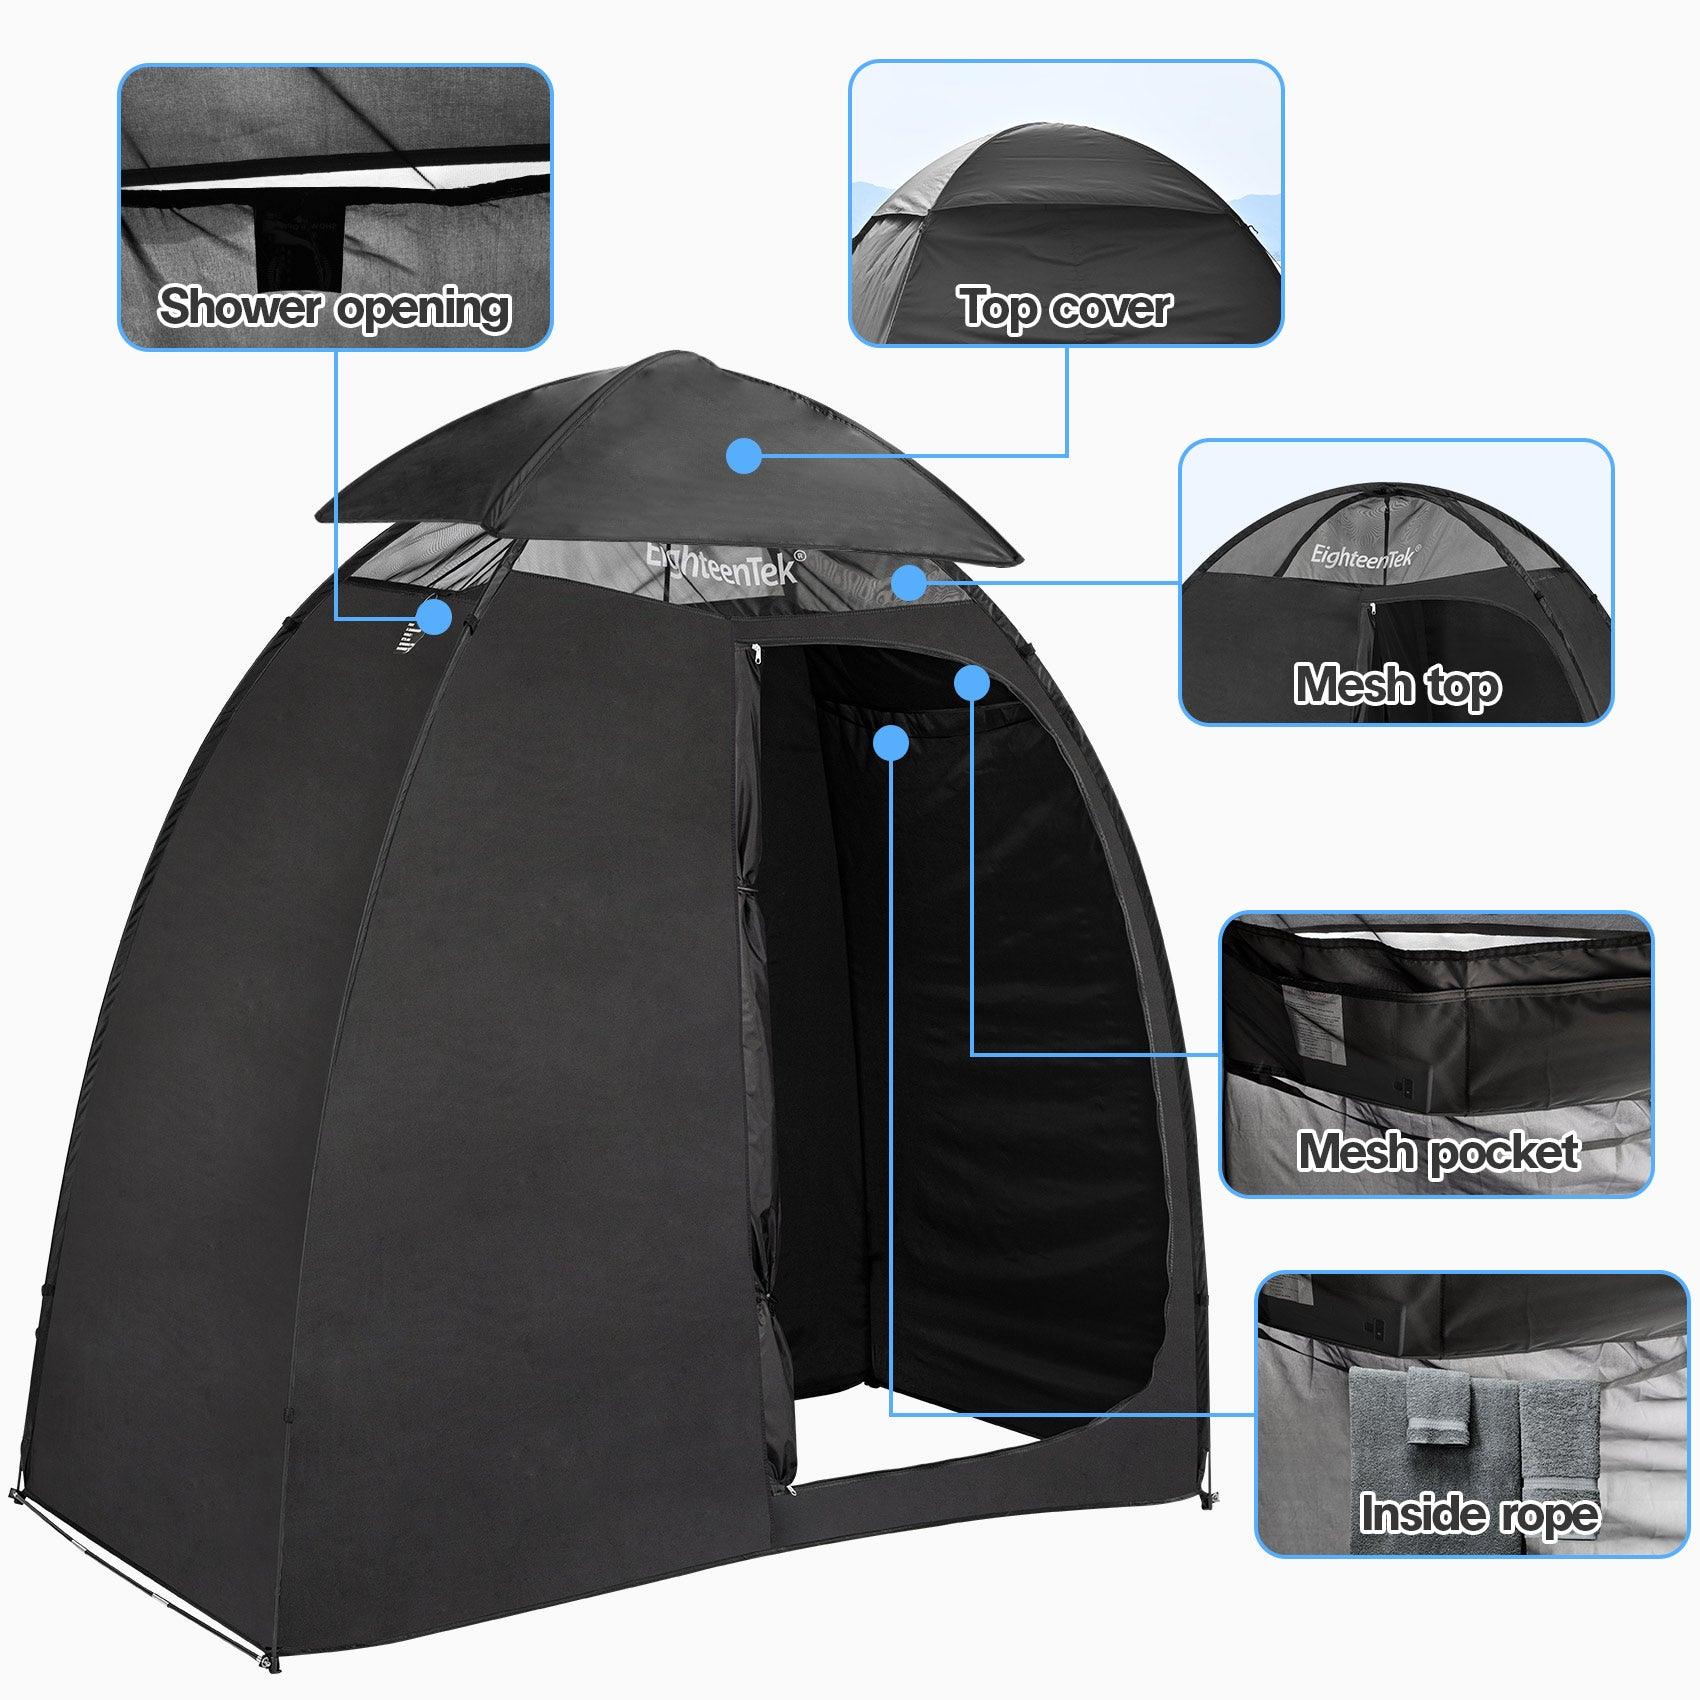 Painting Tent Spray Tent Home Tent In Portable Carry Bag - Buy Painting  Tent,Spray Tent,Diy Home Tent Product on